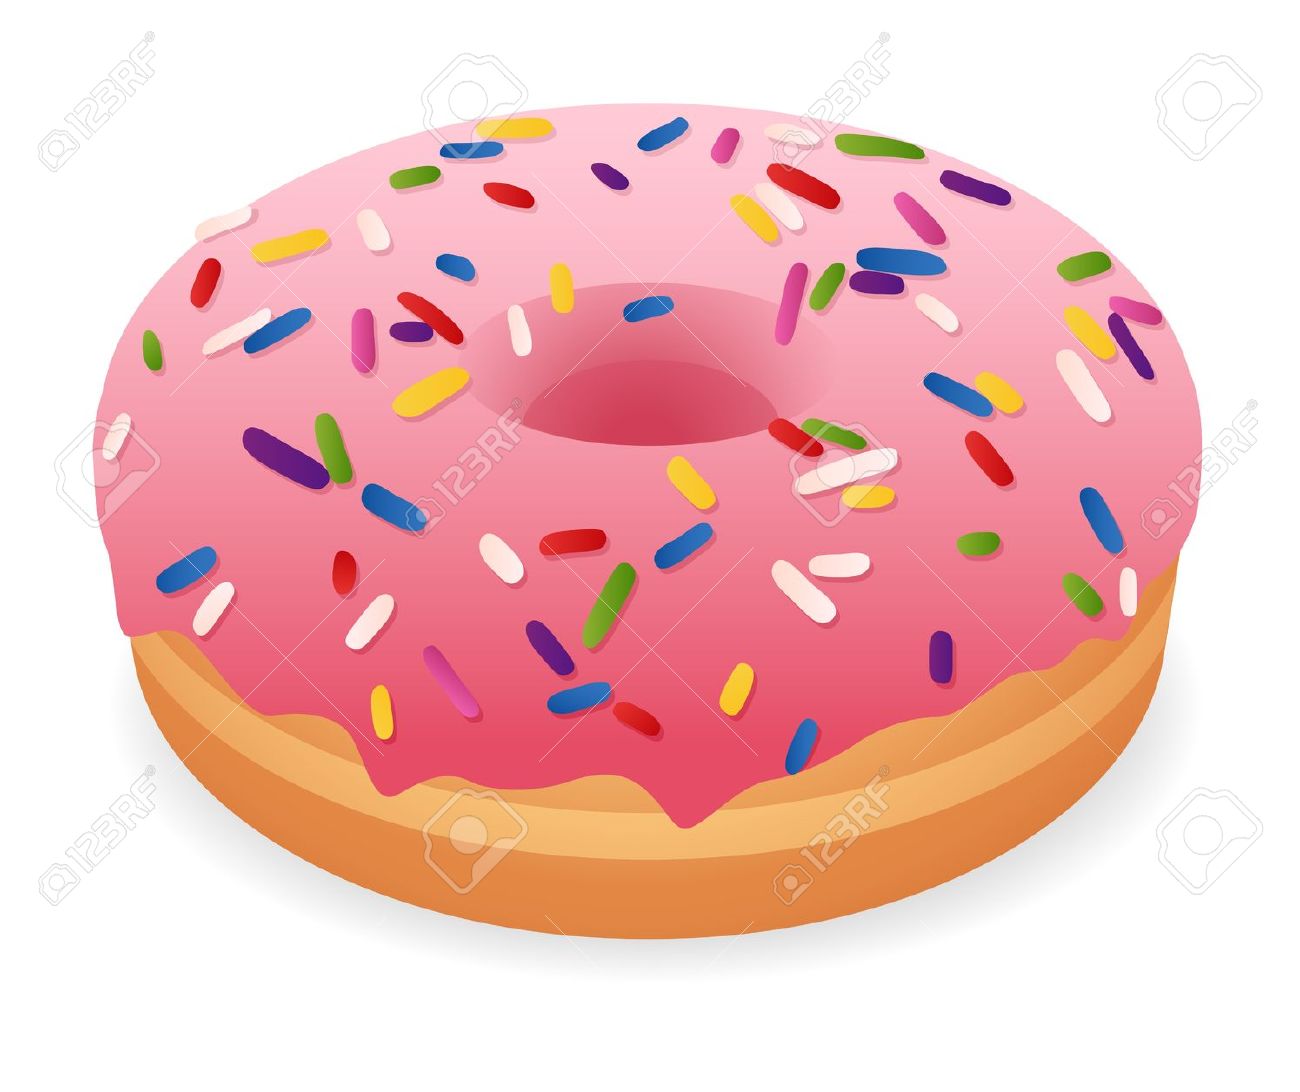 coffee and donuts clipart